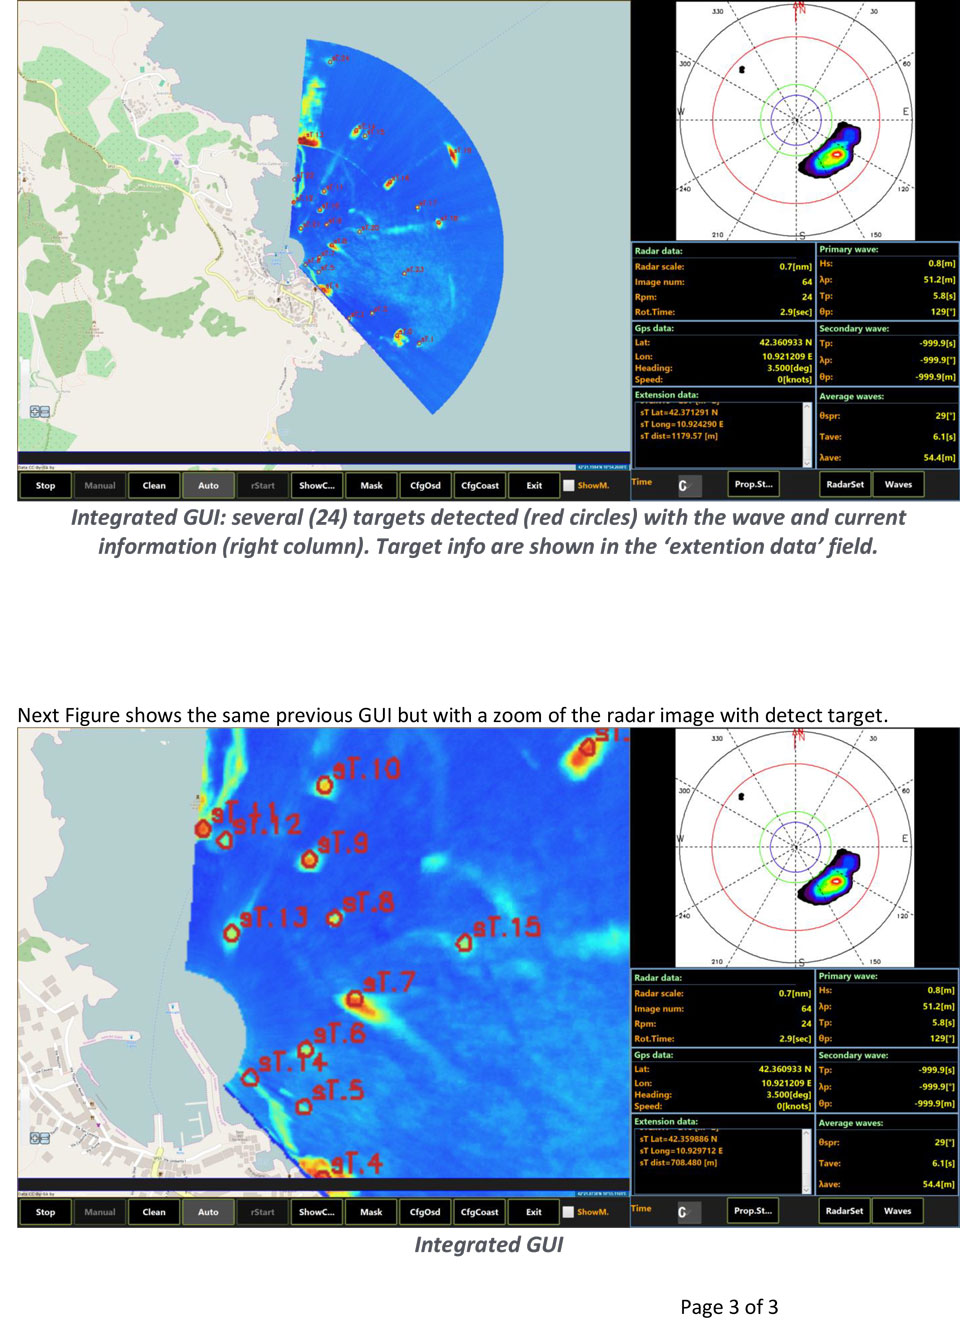 SIMRAD WAVE & SMALL TARGET DETECTION